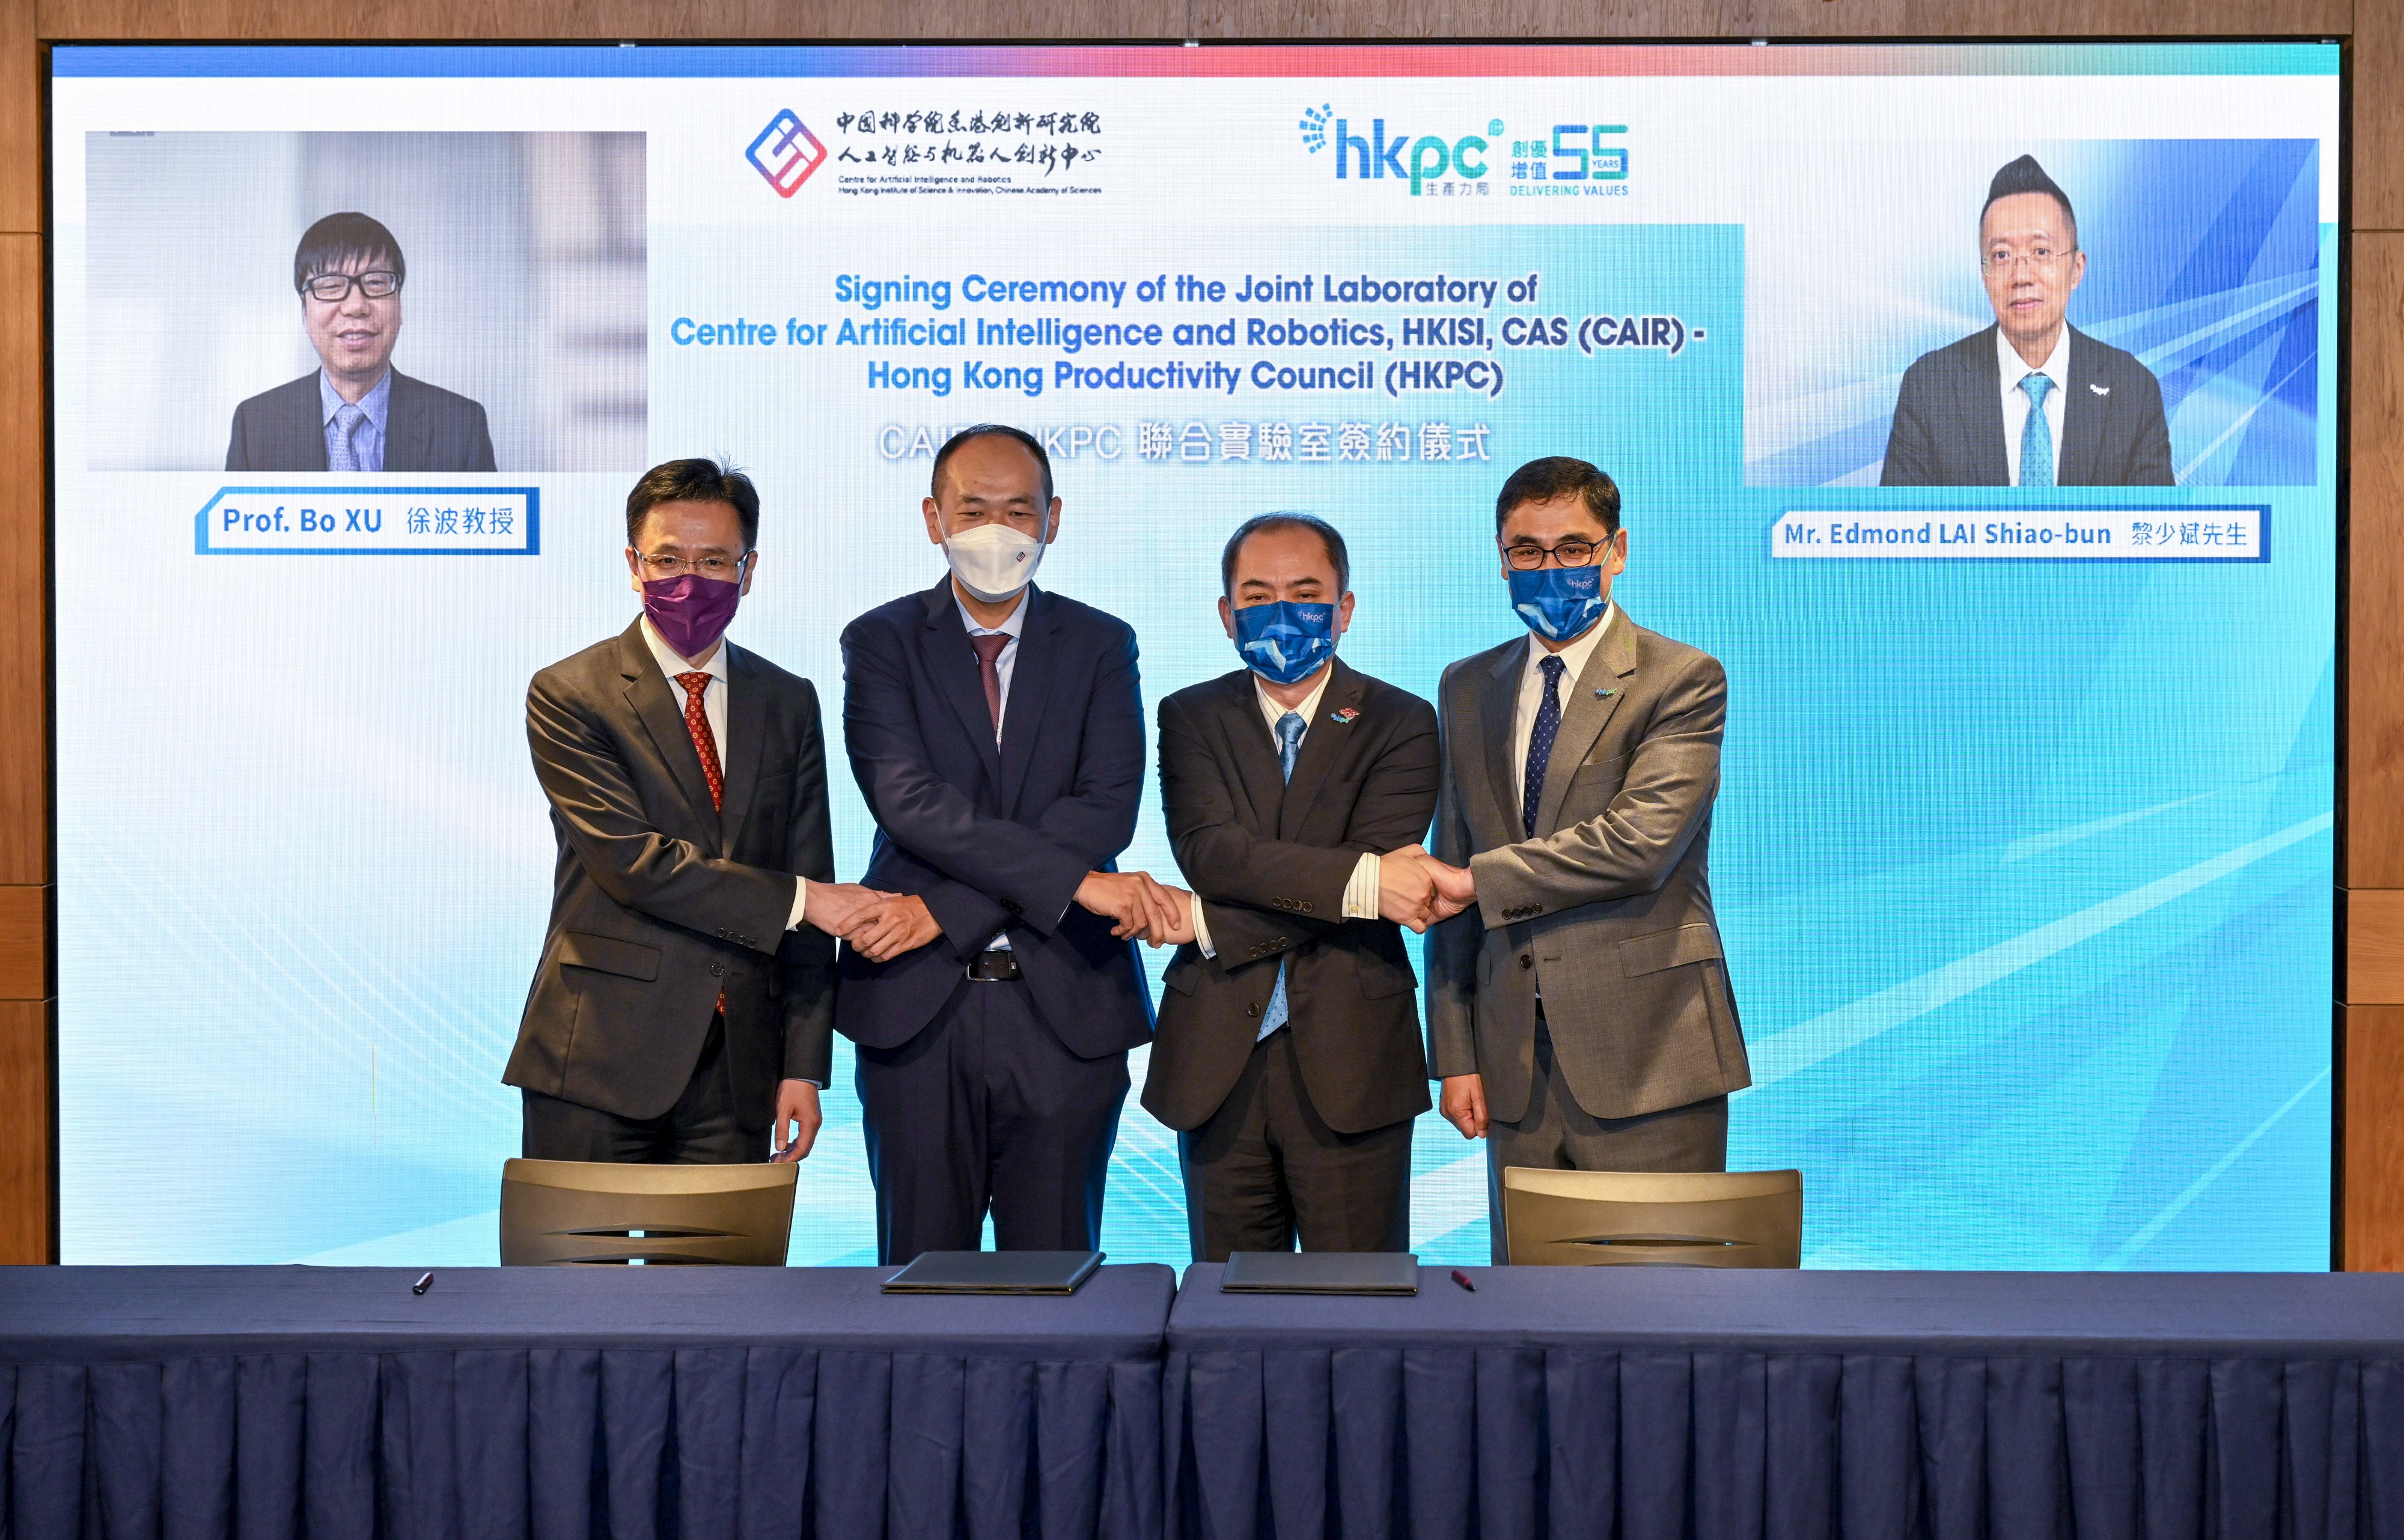 (From left) Dr Bo XU, Director of CAIR and President of Institute of Automation, Chinese Academy of Sciences; Prof. Dong SUN, Secretary for Innovation, Technology and Industry, HKSAR Government; Dr Hongbin LIU, Executive Director of CAIR; Dr Ming GE, General Manager of Robotics and Artificial Intelligence Division of HKPC, Mr Mohamed BUTT, Executive Director of HKPC and Mr Edmond LAI, Chief Digital Officer of HKPC, take a group photo to commemorate the establishment of the CAIR-HKPC Joint Lab.